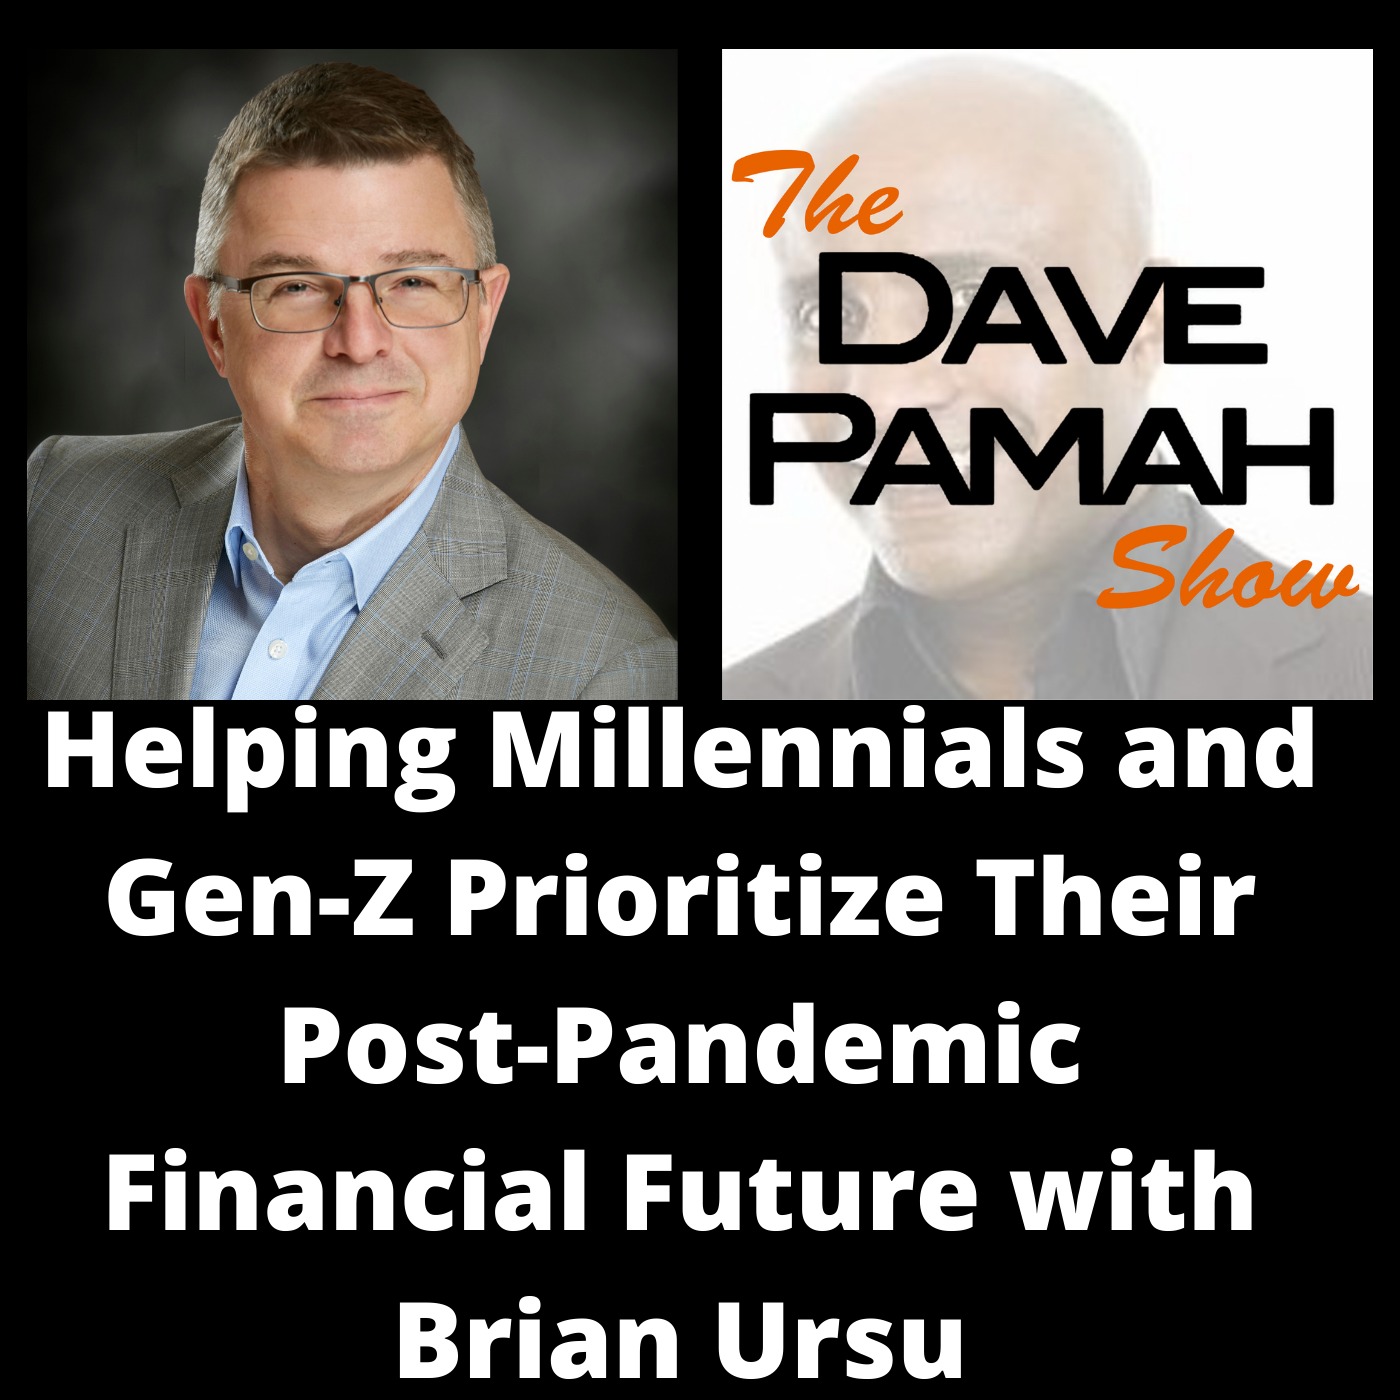 Helping Millennials and Gen-Z Prioritize Their Post-Pandemic Financial Future with Brian Ursu